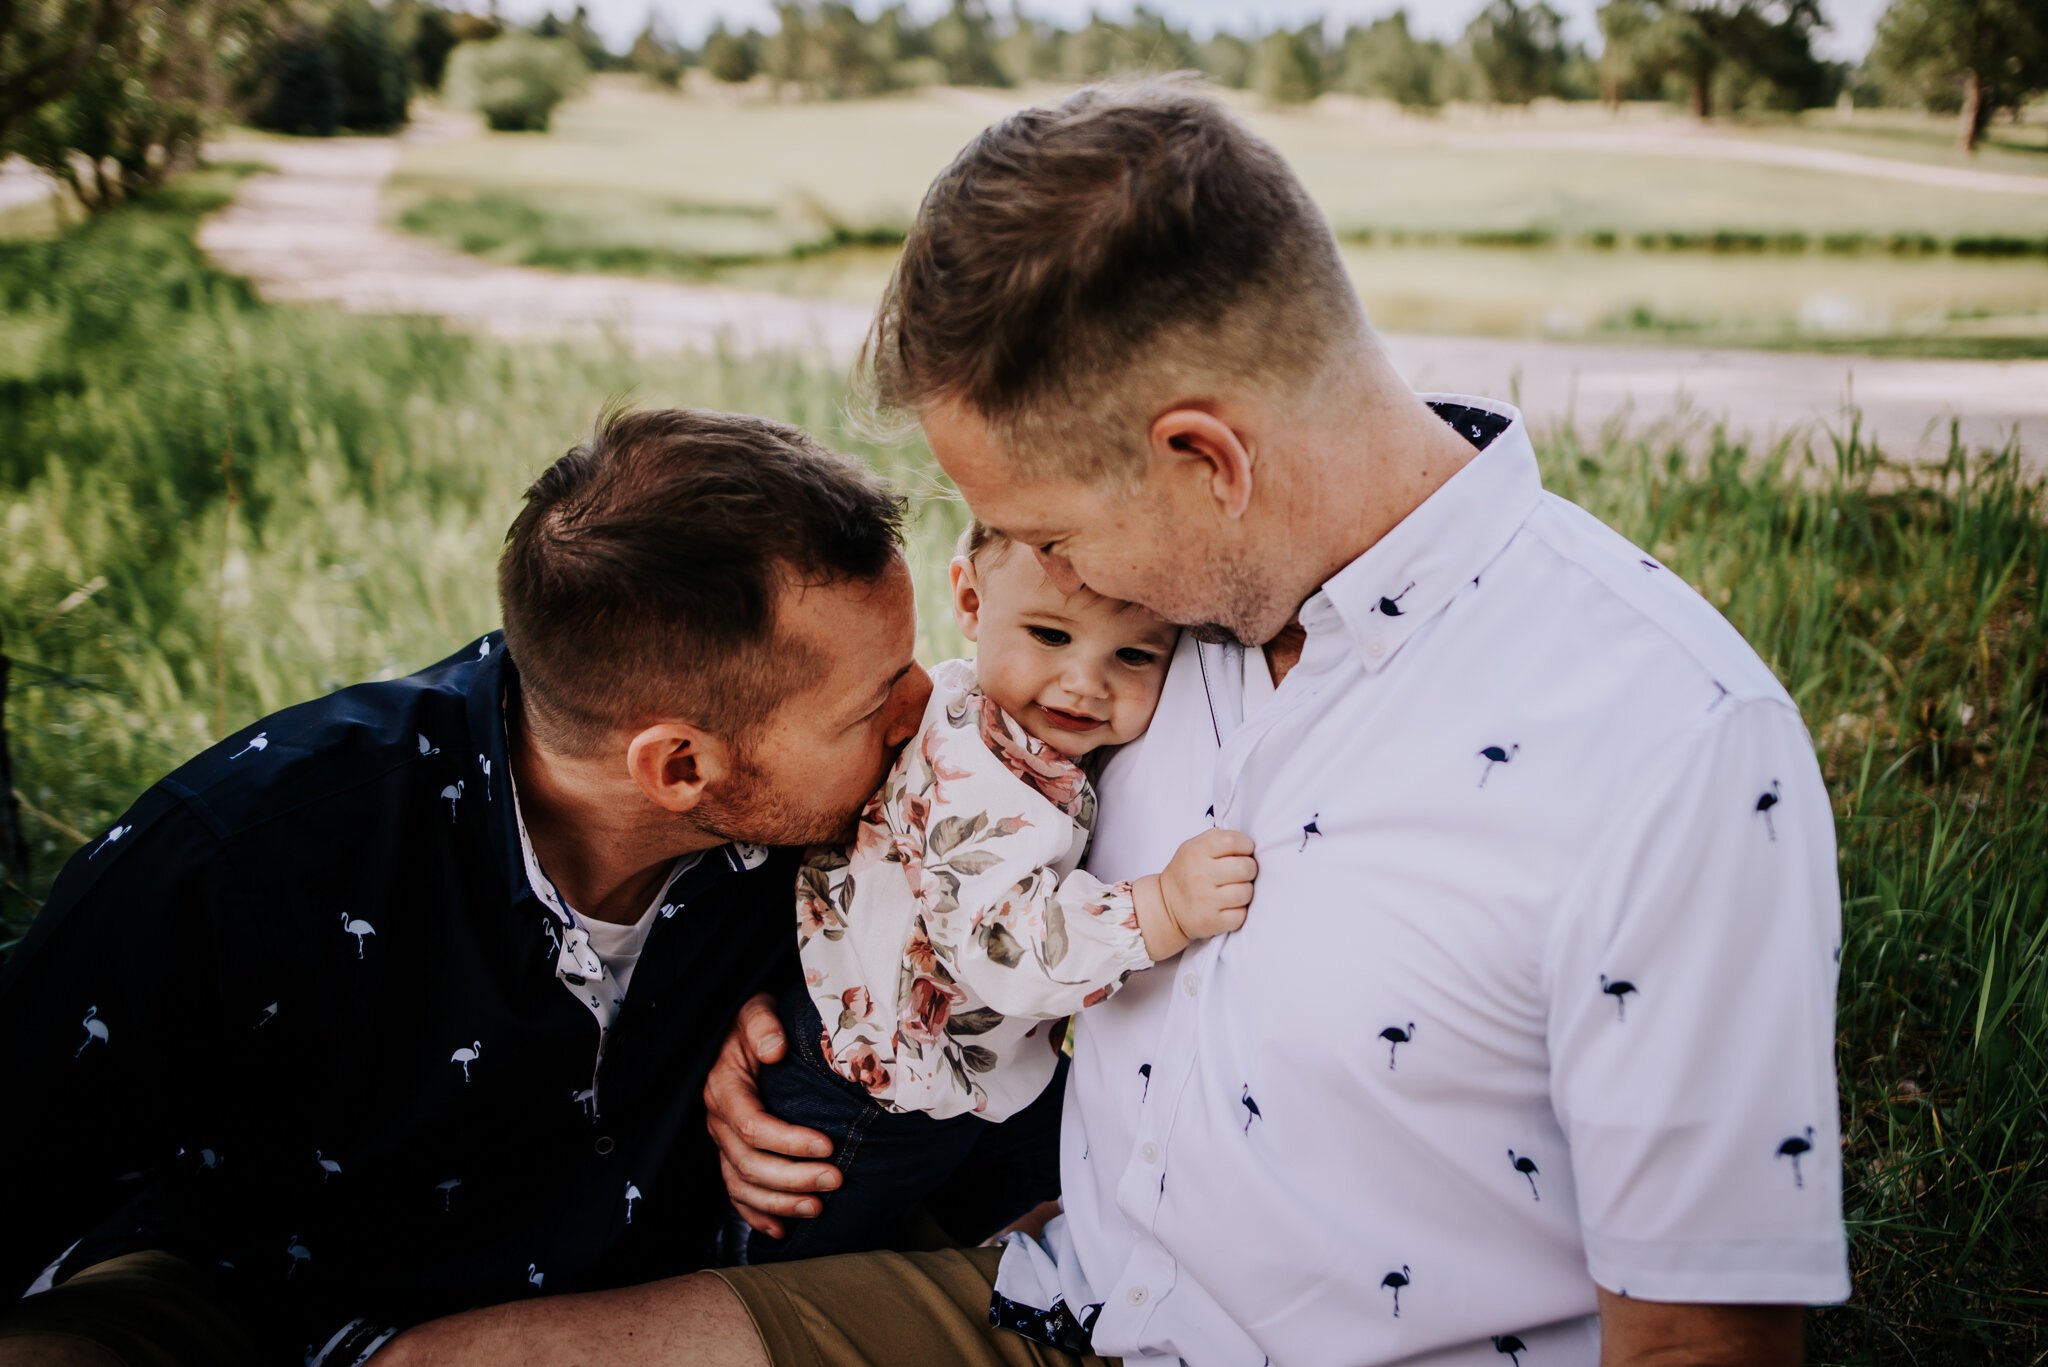 Paul+and+Dave+Gay+Couple+Family+Session+Colorado+Springs+Colorado+LGBTQ+Dads+Daughter+Wild+Prairie+Photography-21-2020.jpeg